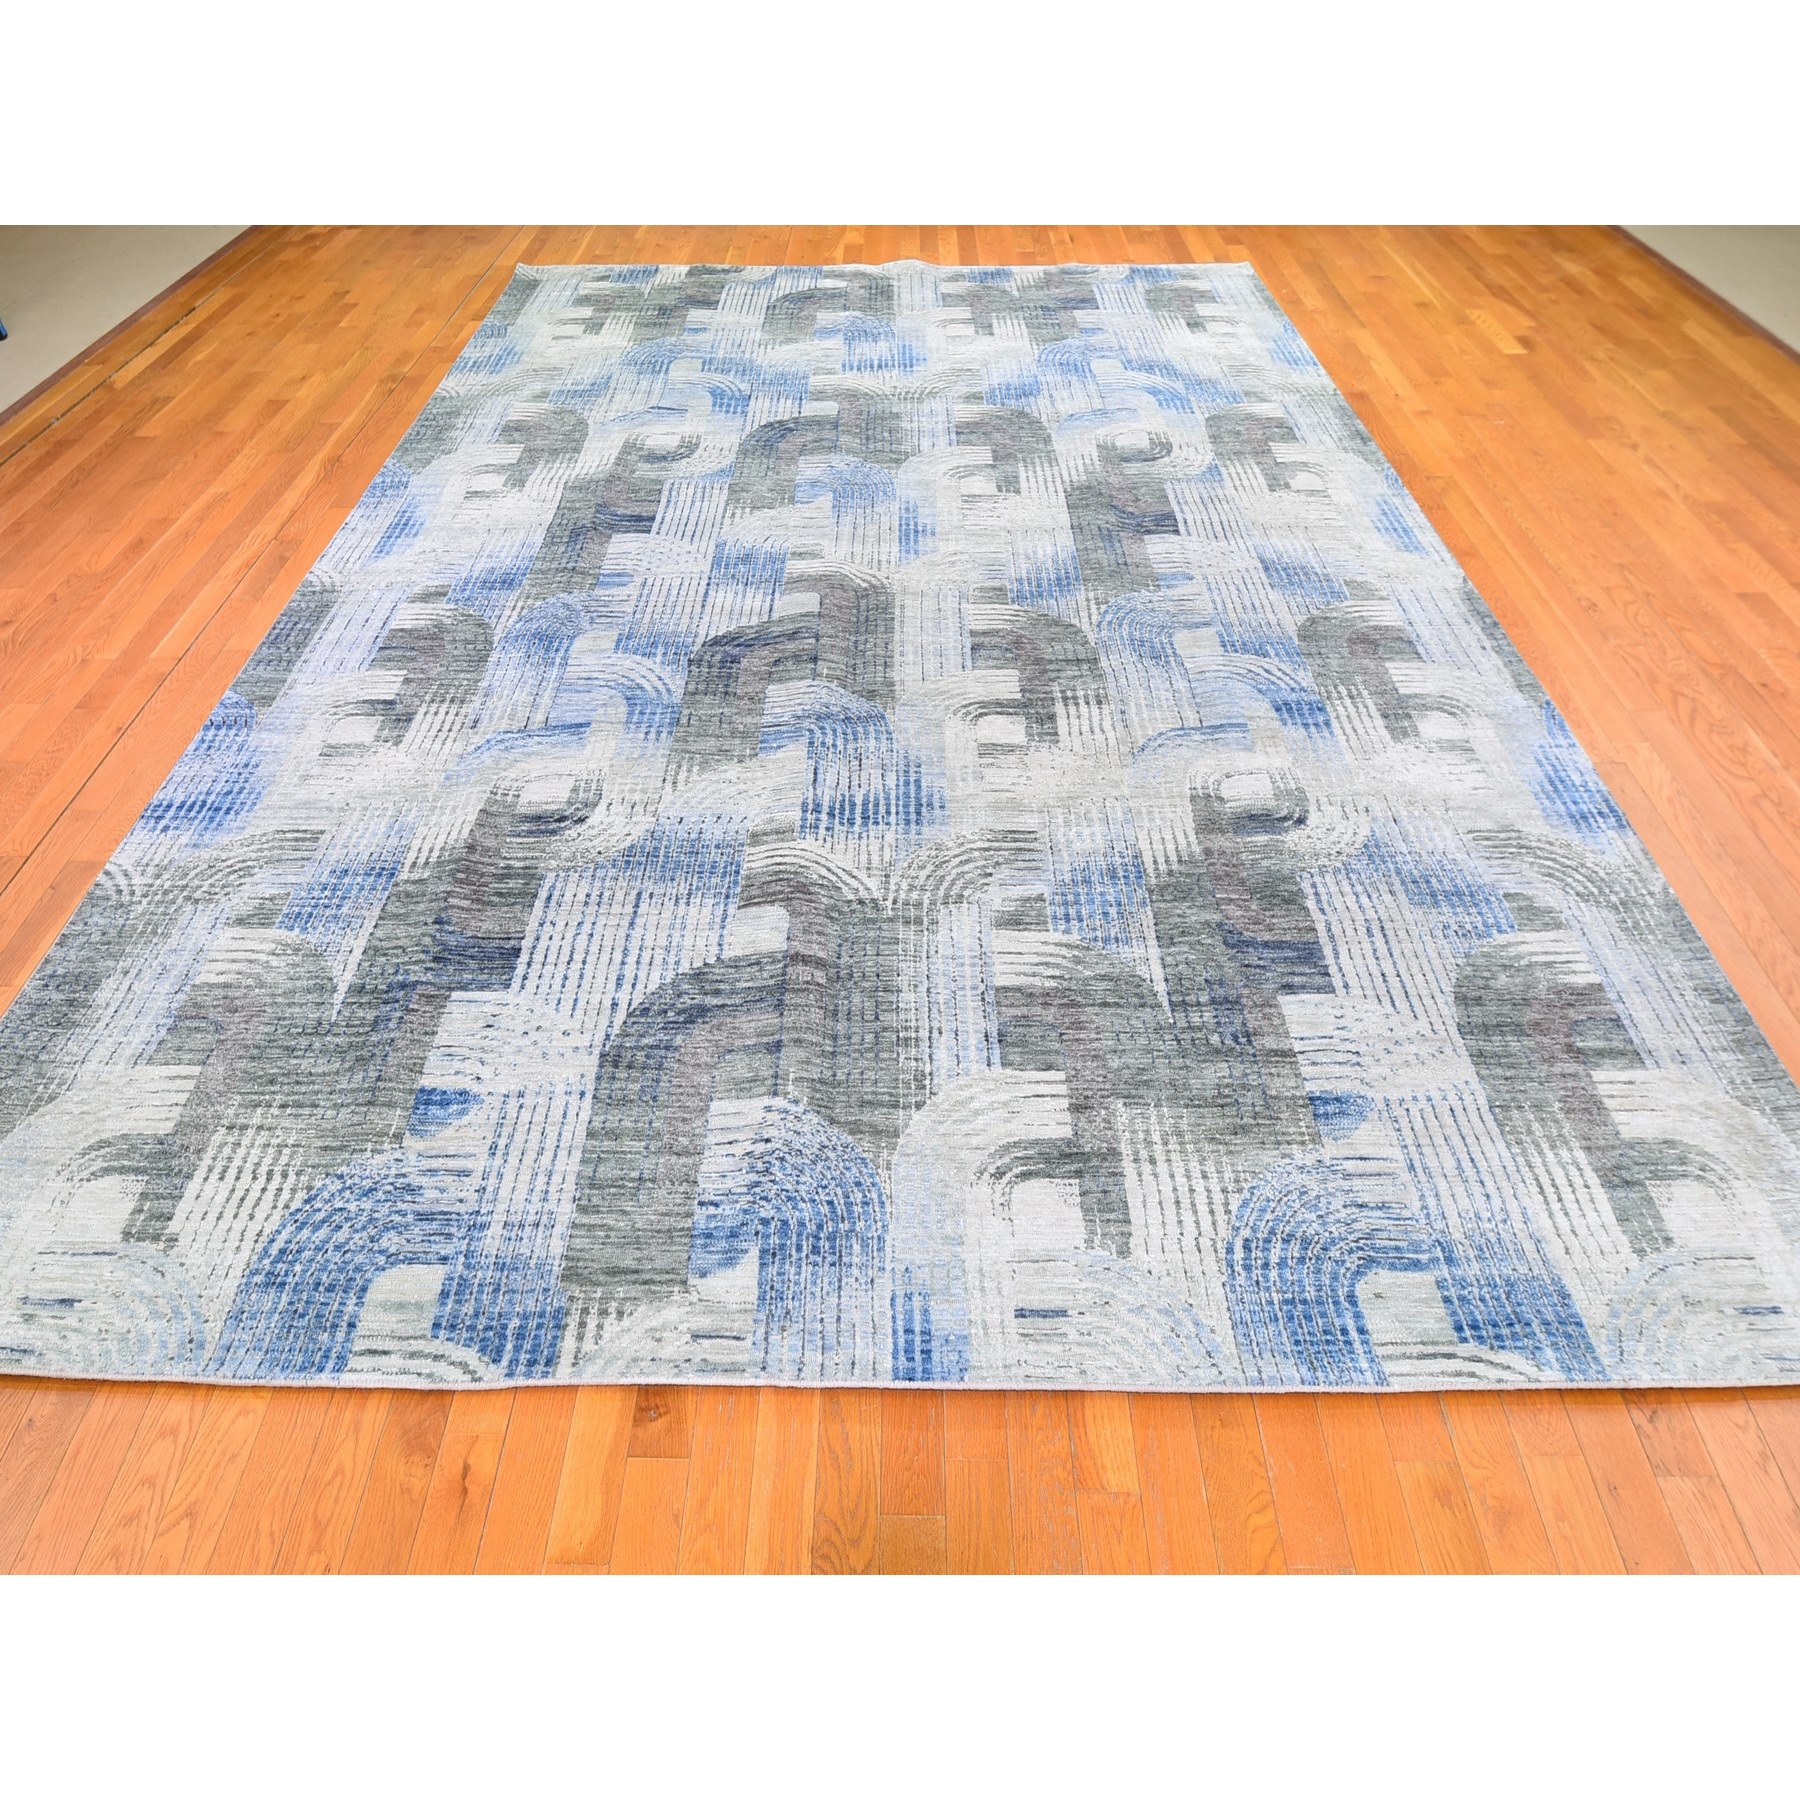 10'x14'3" THE INTERTWINED PASSAGE, Silk with Textured Wool Hand Woven Oriental Rug 